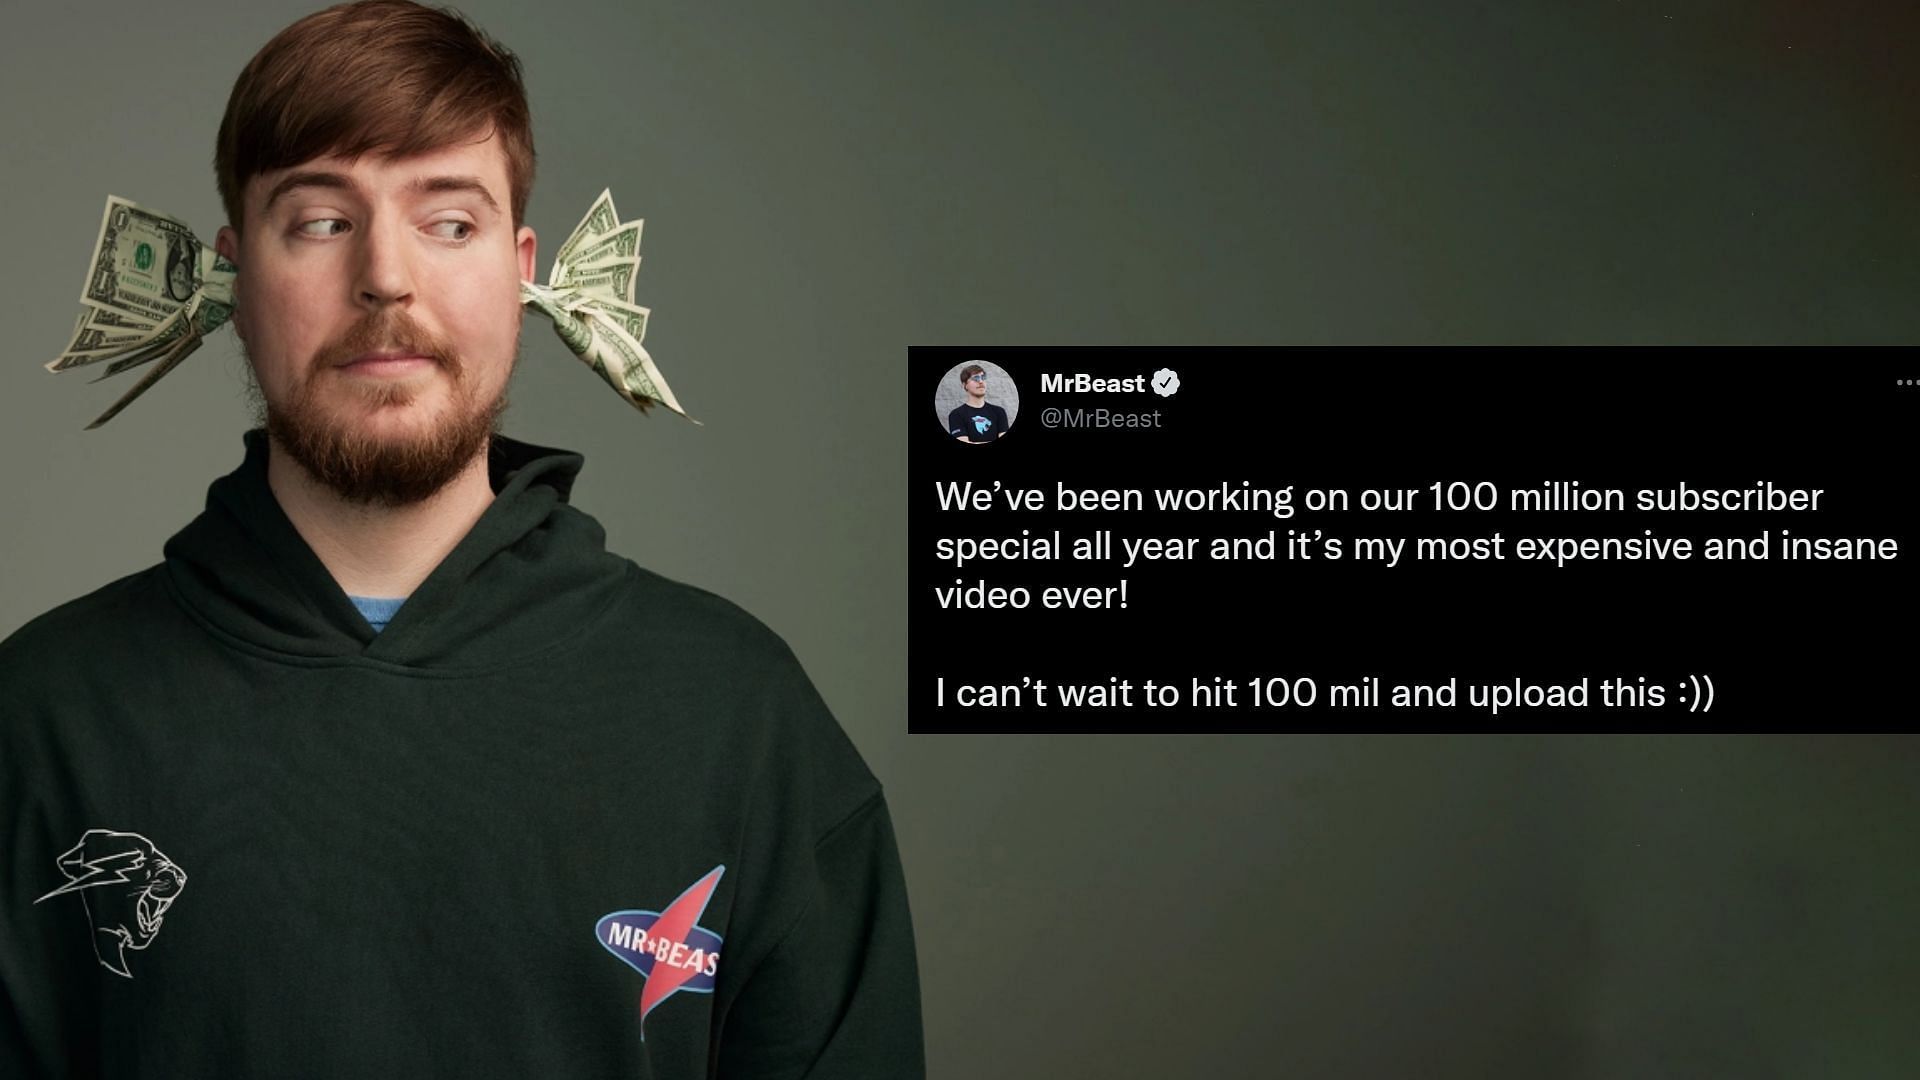 MrBeast announces his upcoming video for 100 million subscriber celebration (Image via MrBeast/Twitter)